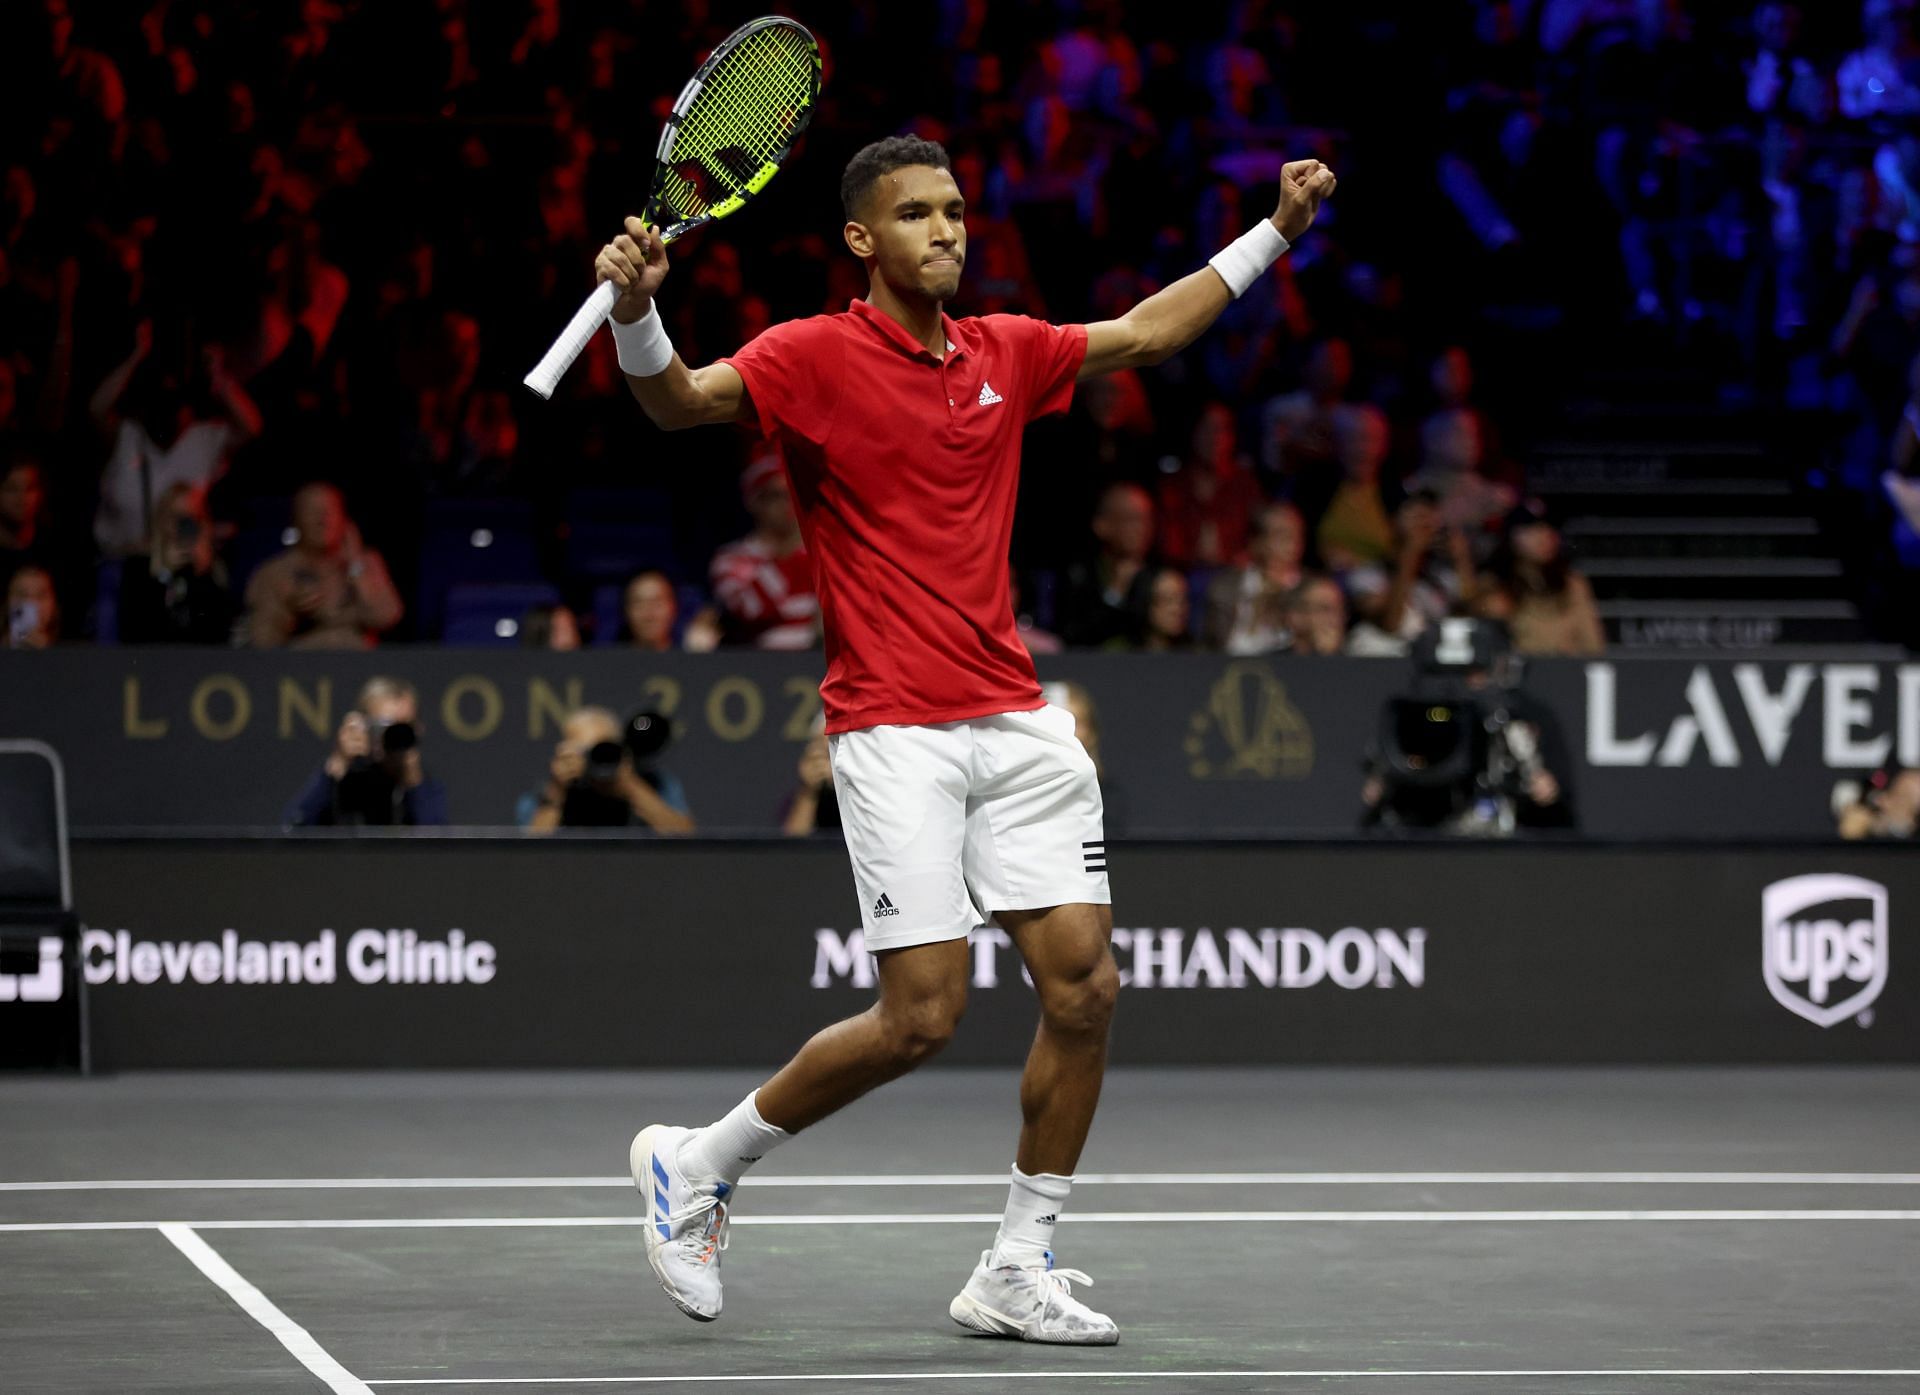 Auger-Aliassime at the 2022 Laver Cup.